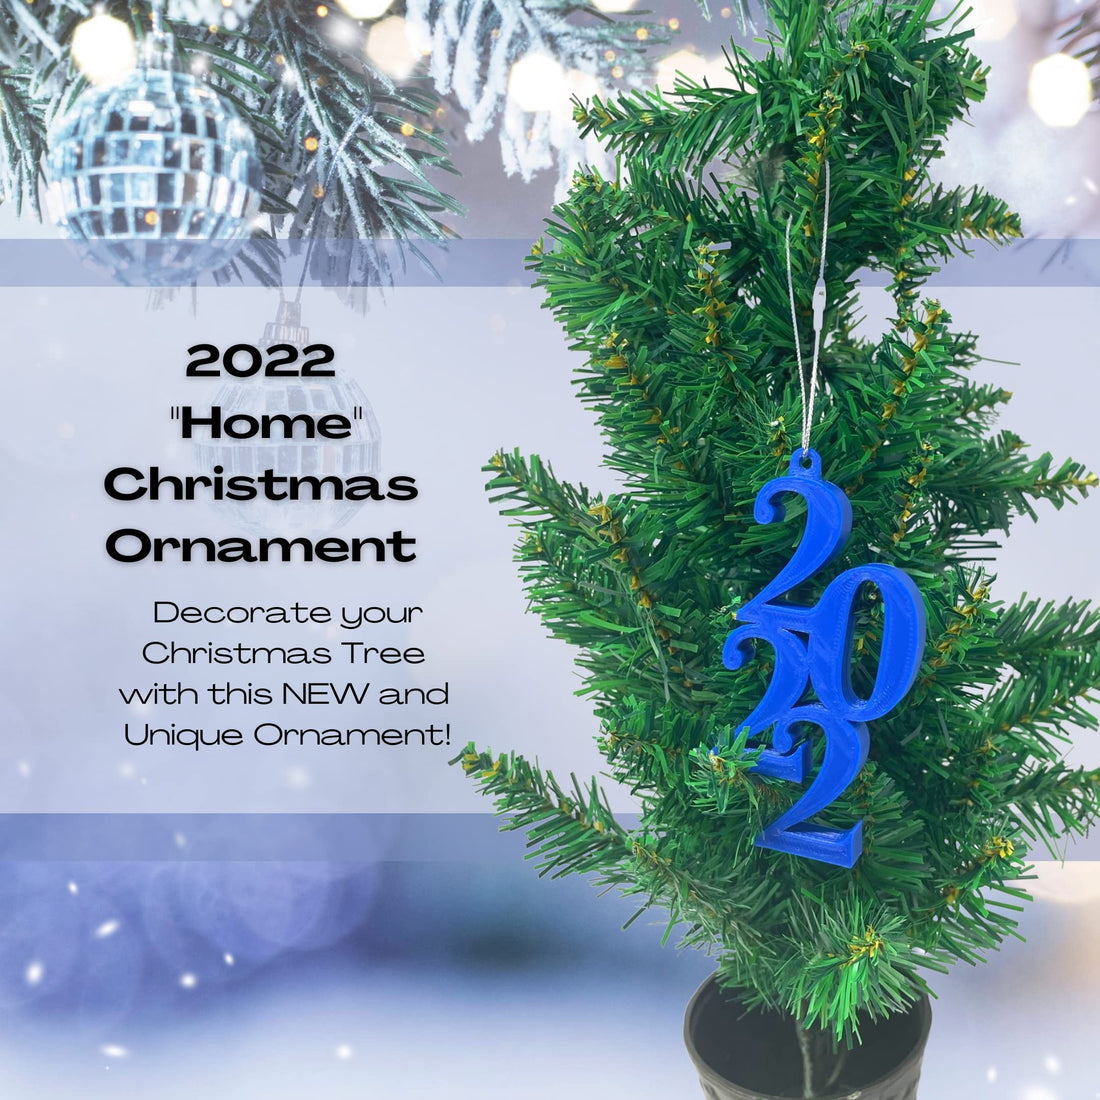 2022 Christmas Ornament - Christmas Decorative Holiday Ornament - Made in The USA